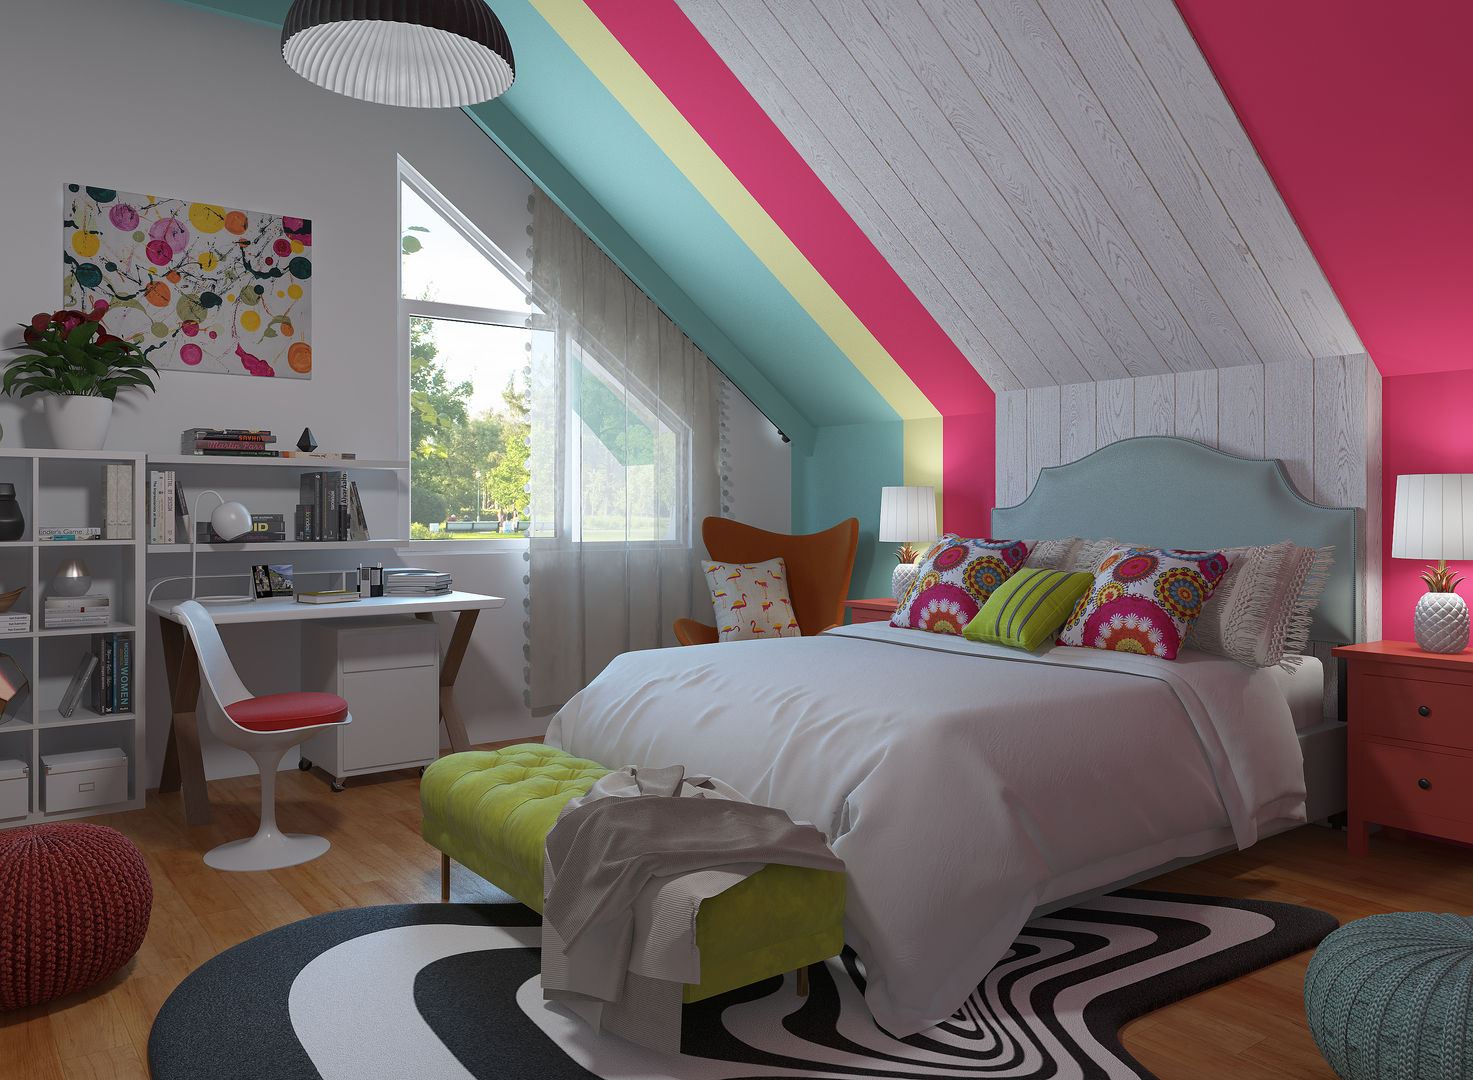 Eclectic -Pop Art decoration homify オリジナルスタイルの 寝室 bedroom,decorate bedroom,how to decorate,pop art style,pop art bedroom,3d design,interior design,rendering,home deco,colourful,customized designs